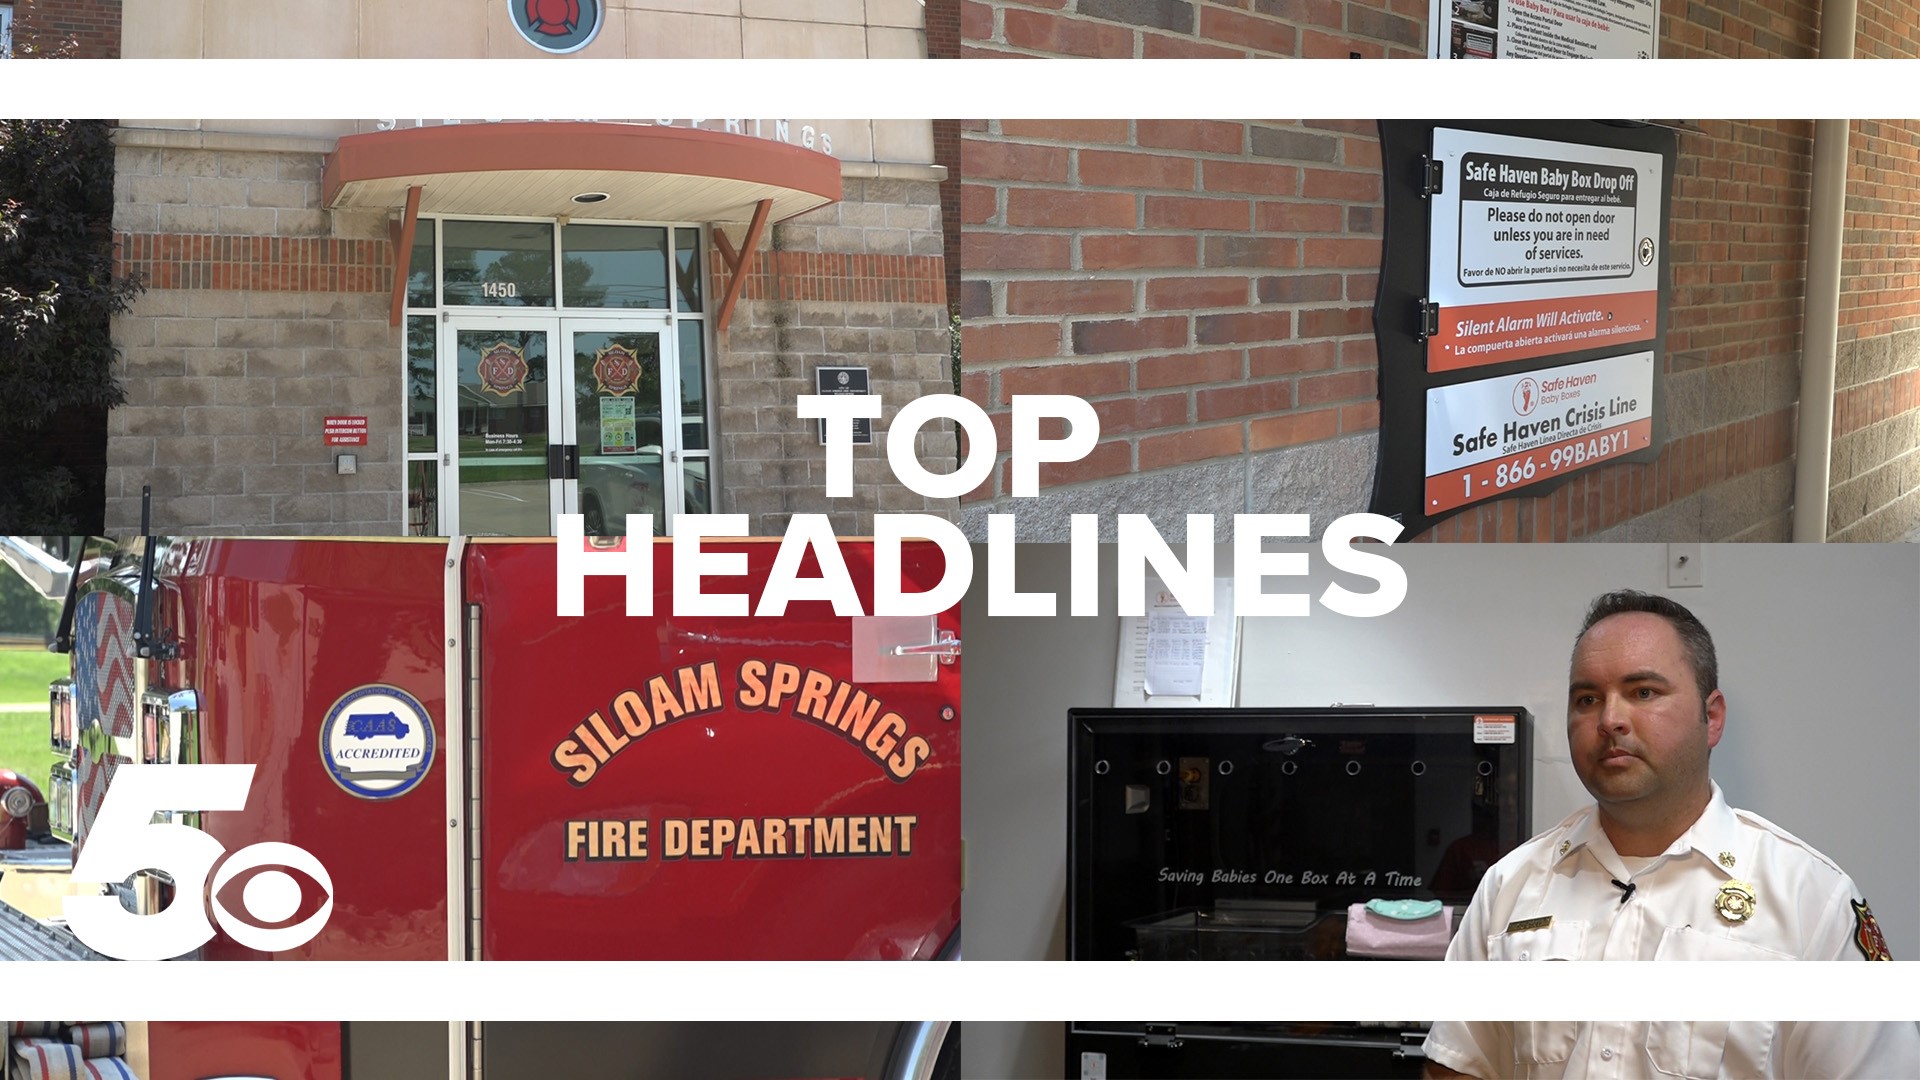 The topics in today's top headlines include a new Safe Haven Baby Box in Siloam Springs, a man found guilty of conspiracy to riot, weather, and more!